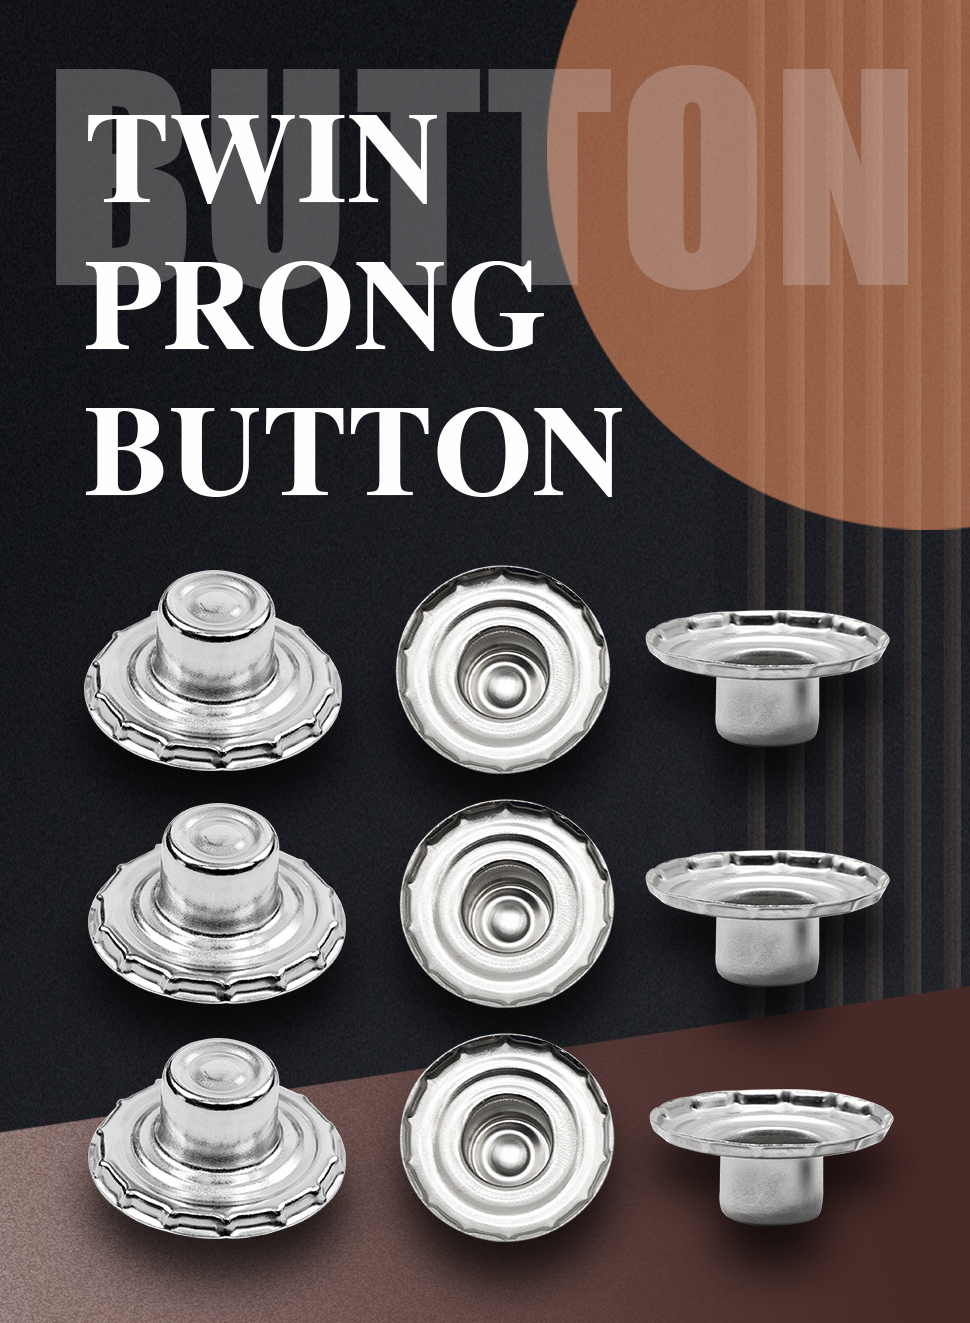 Twin Prong Button